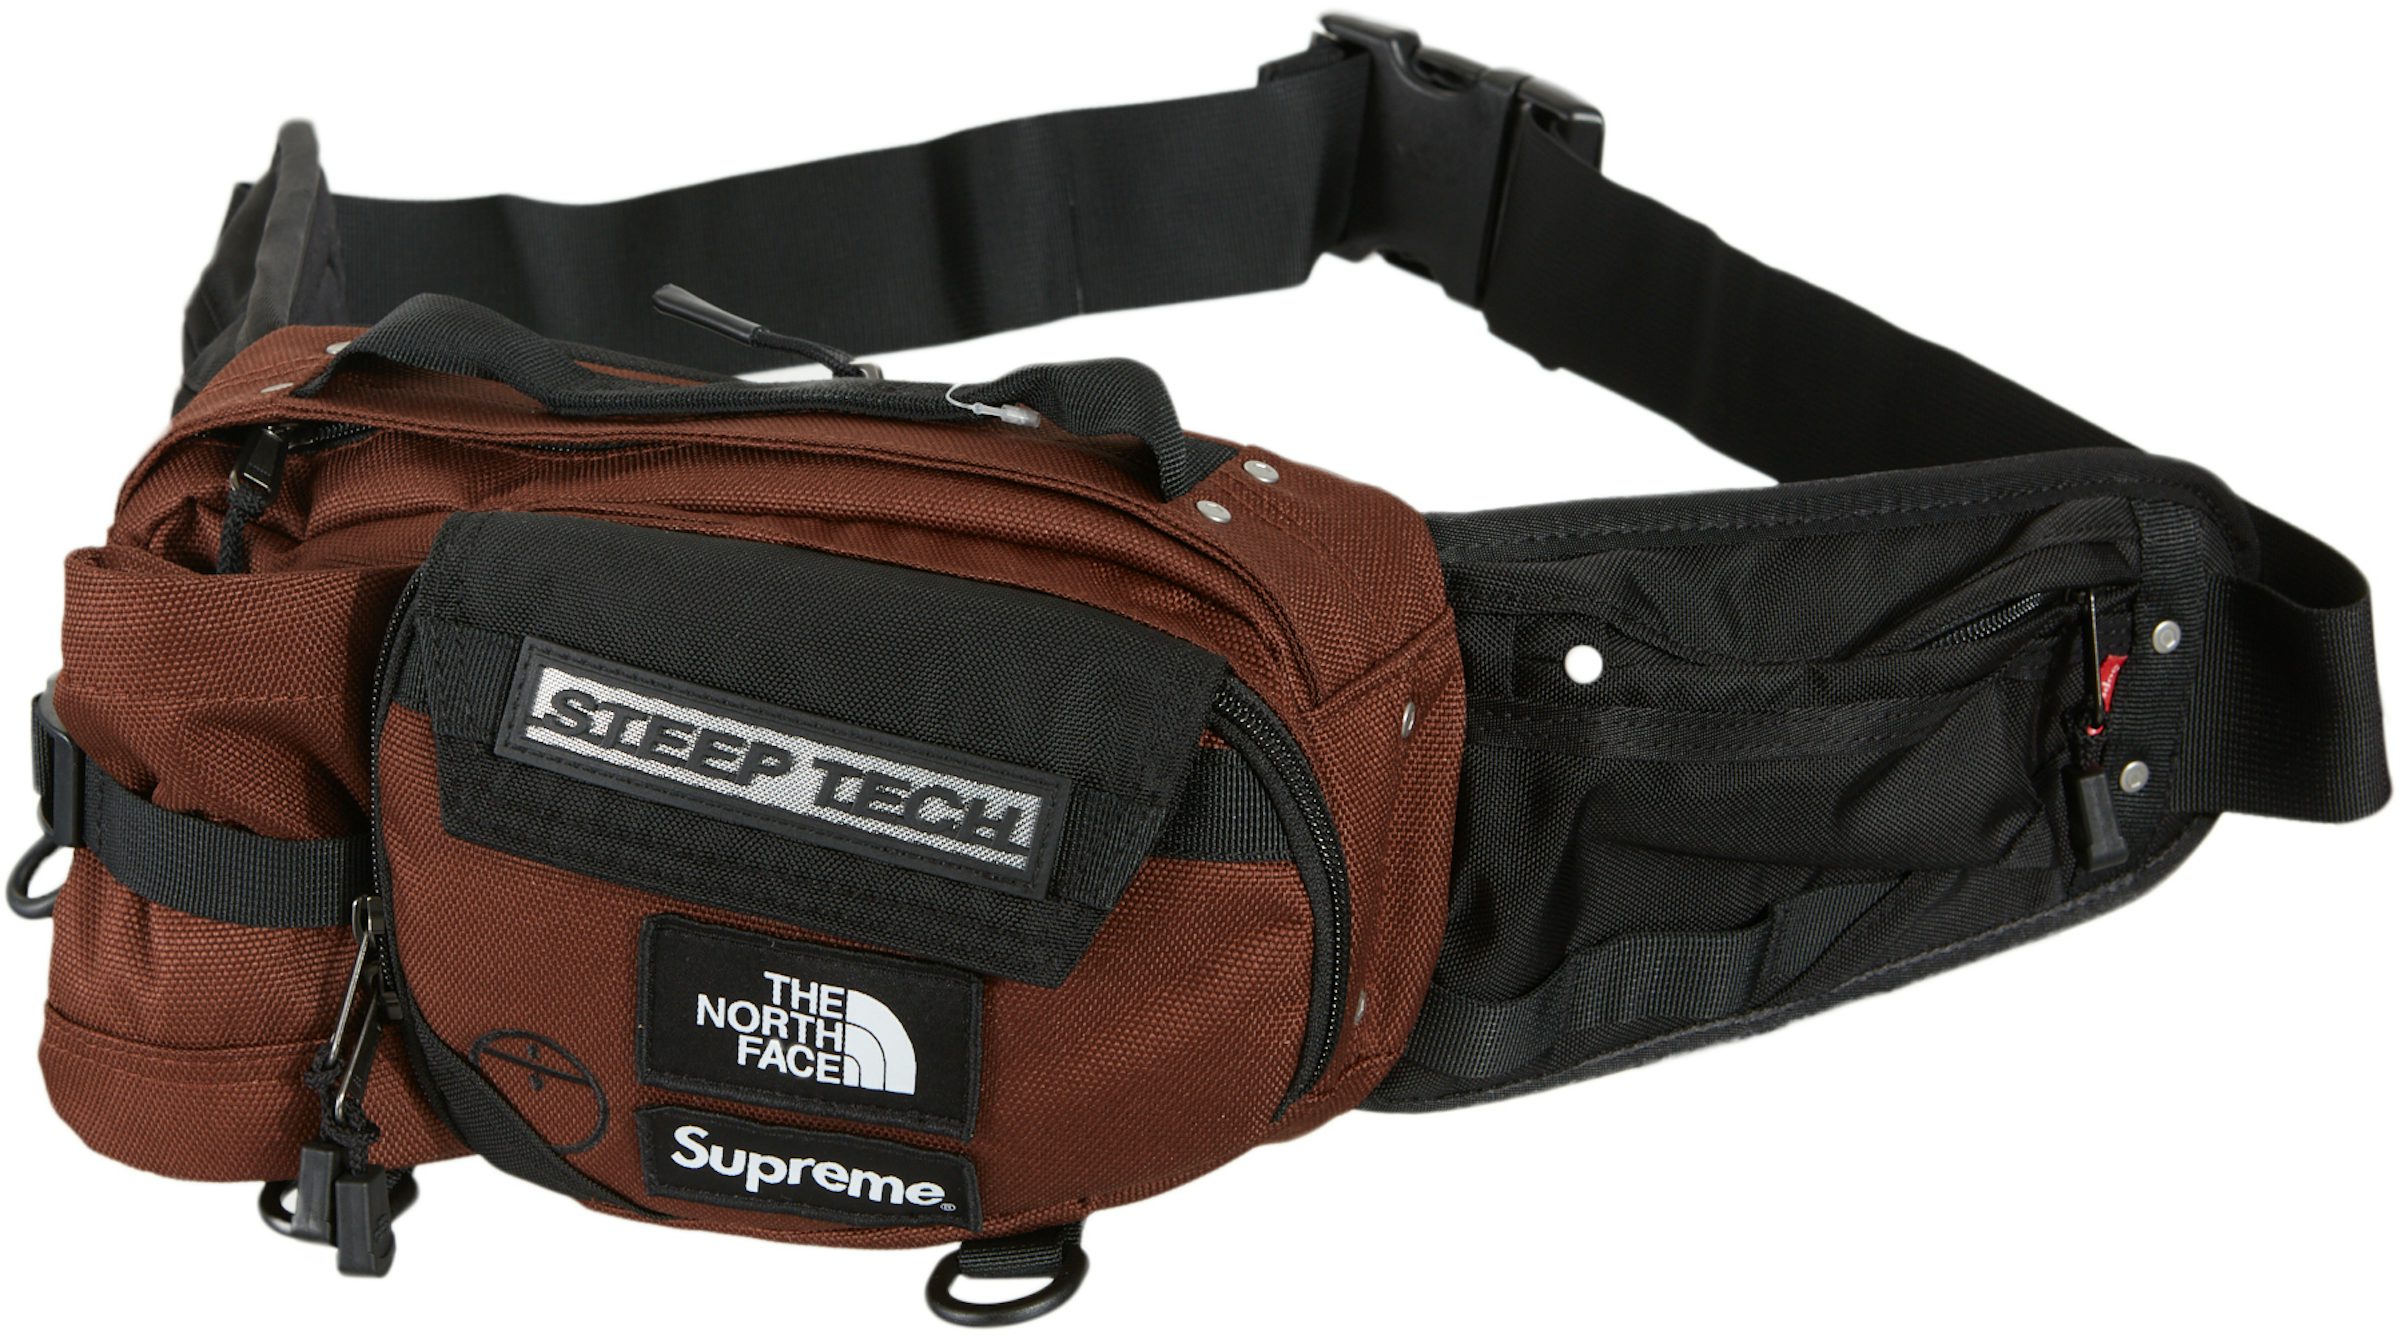 Supreme FW22 Small Waist Bag Fanny Pack Red